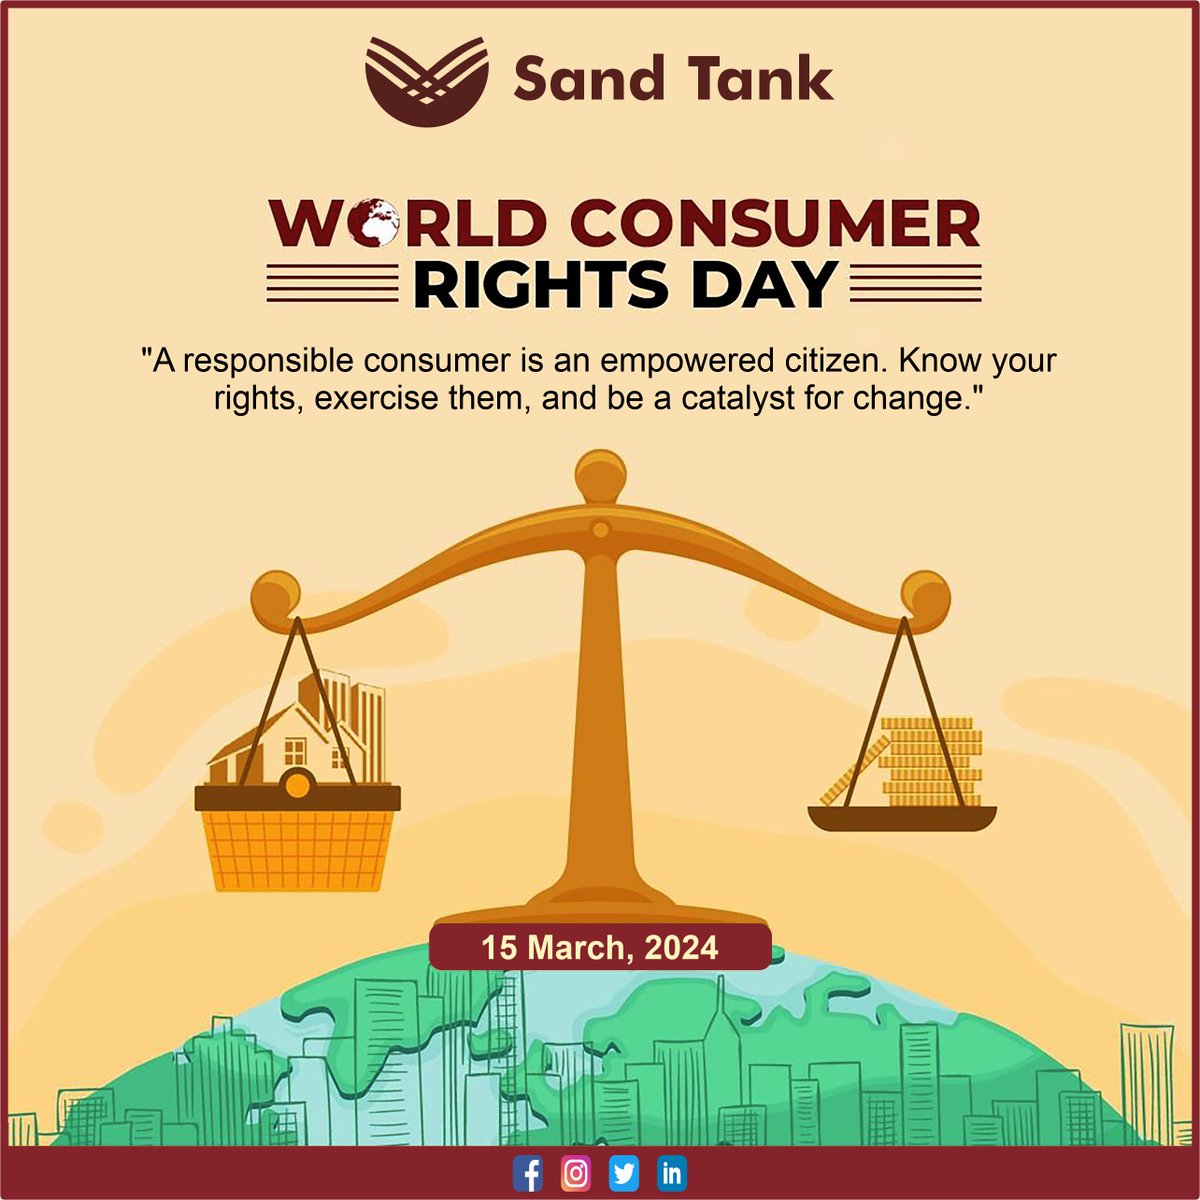 Today and every day, let's stand up for consumer rights and demand fair treatment, safe products, and ethical practices. Happy World Consumer Rights Day! 💼🔒

#Sandtankfoundation #WorldConsumerRightsDay #ConsumerRightsDay #ProtectConsumers #ConsumerProtection #KnowYourRights